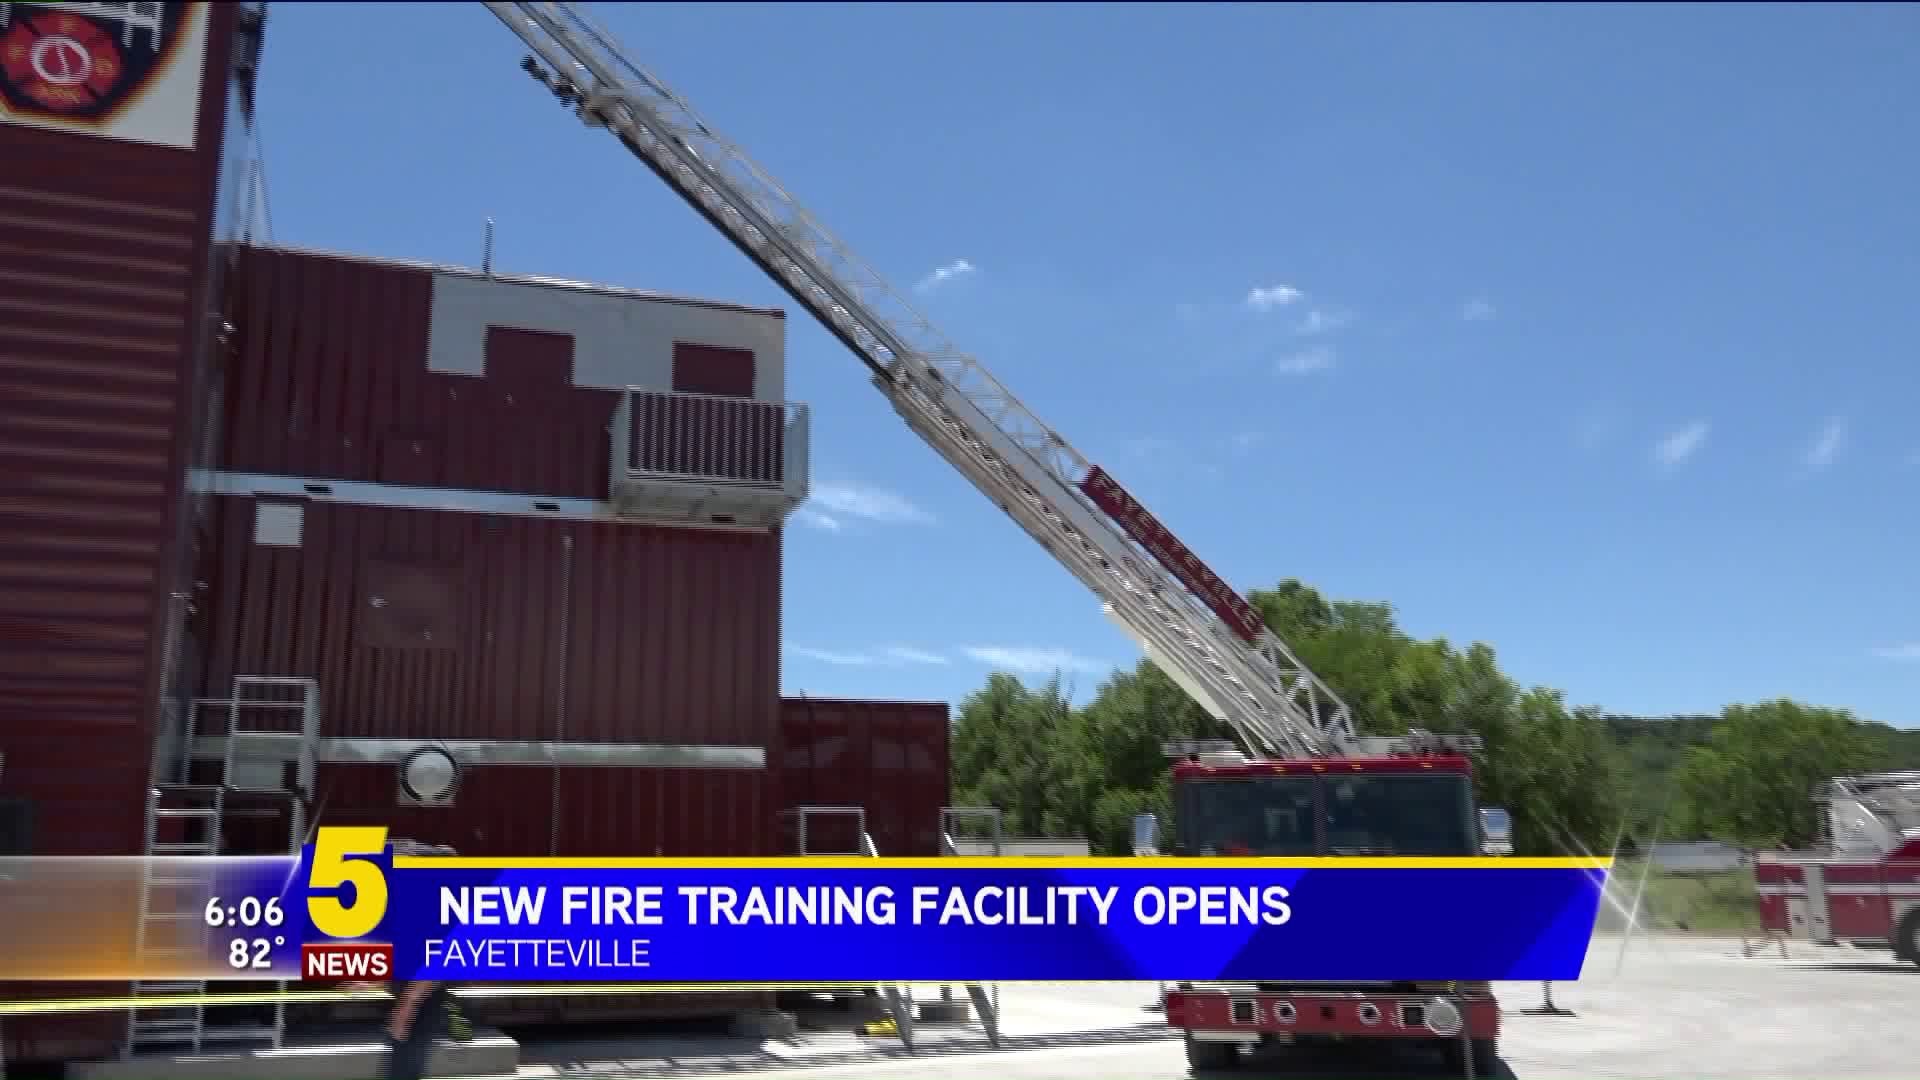 New Fire Training Facility Opens